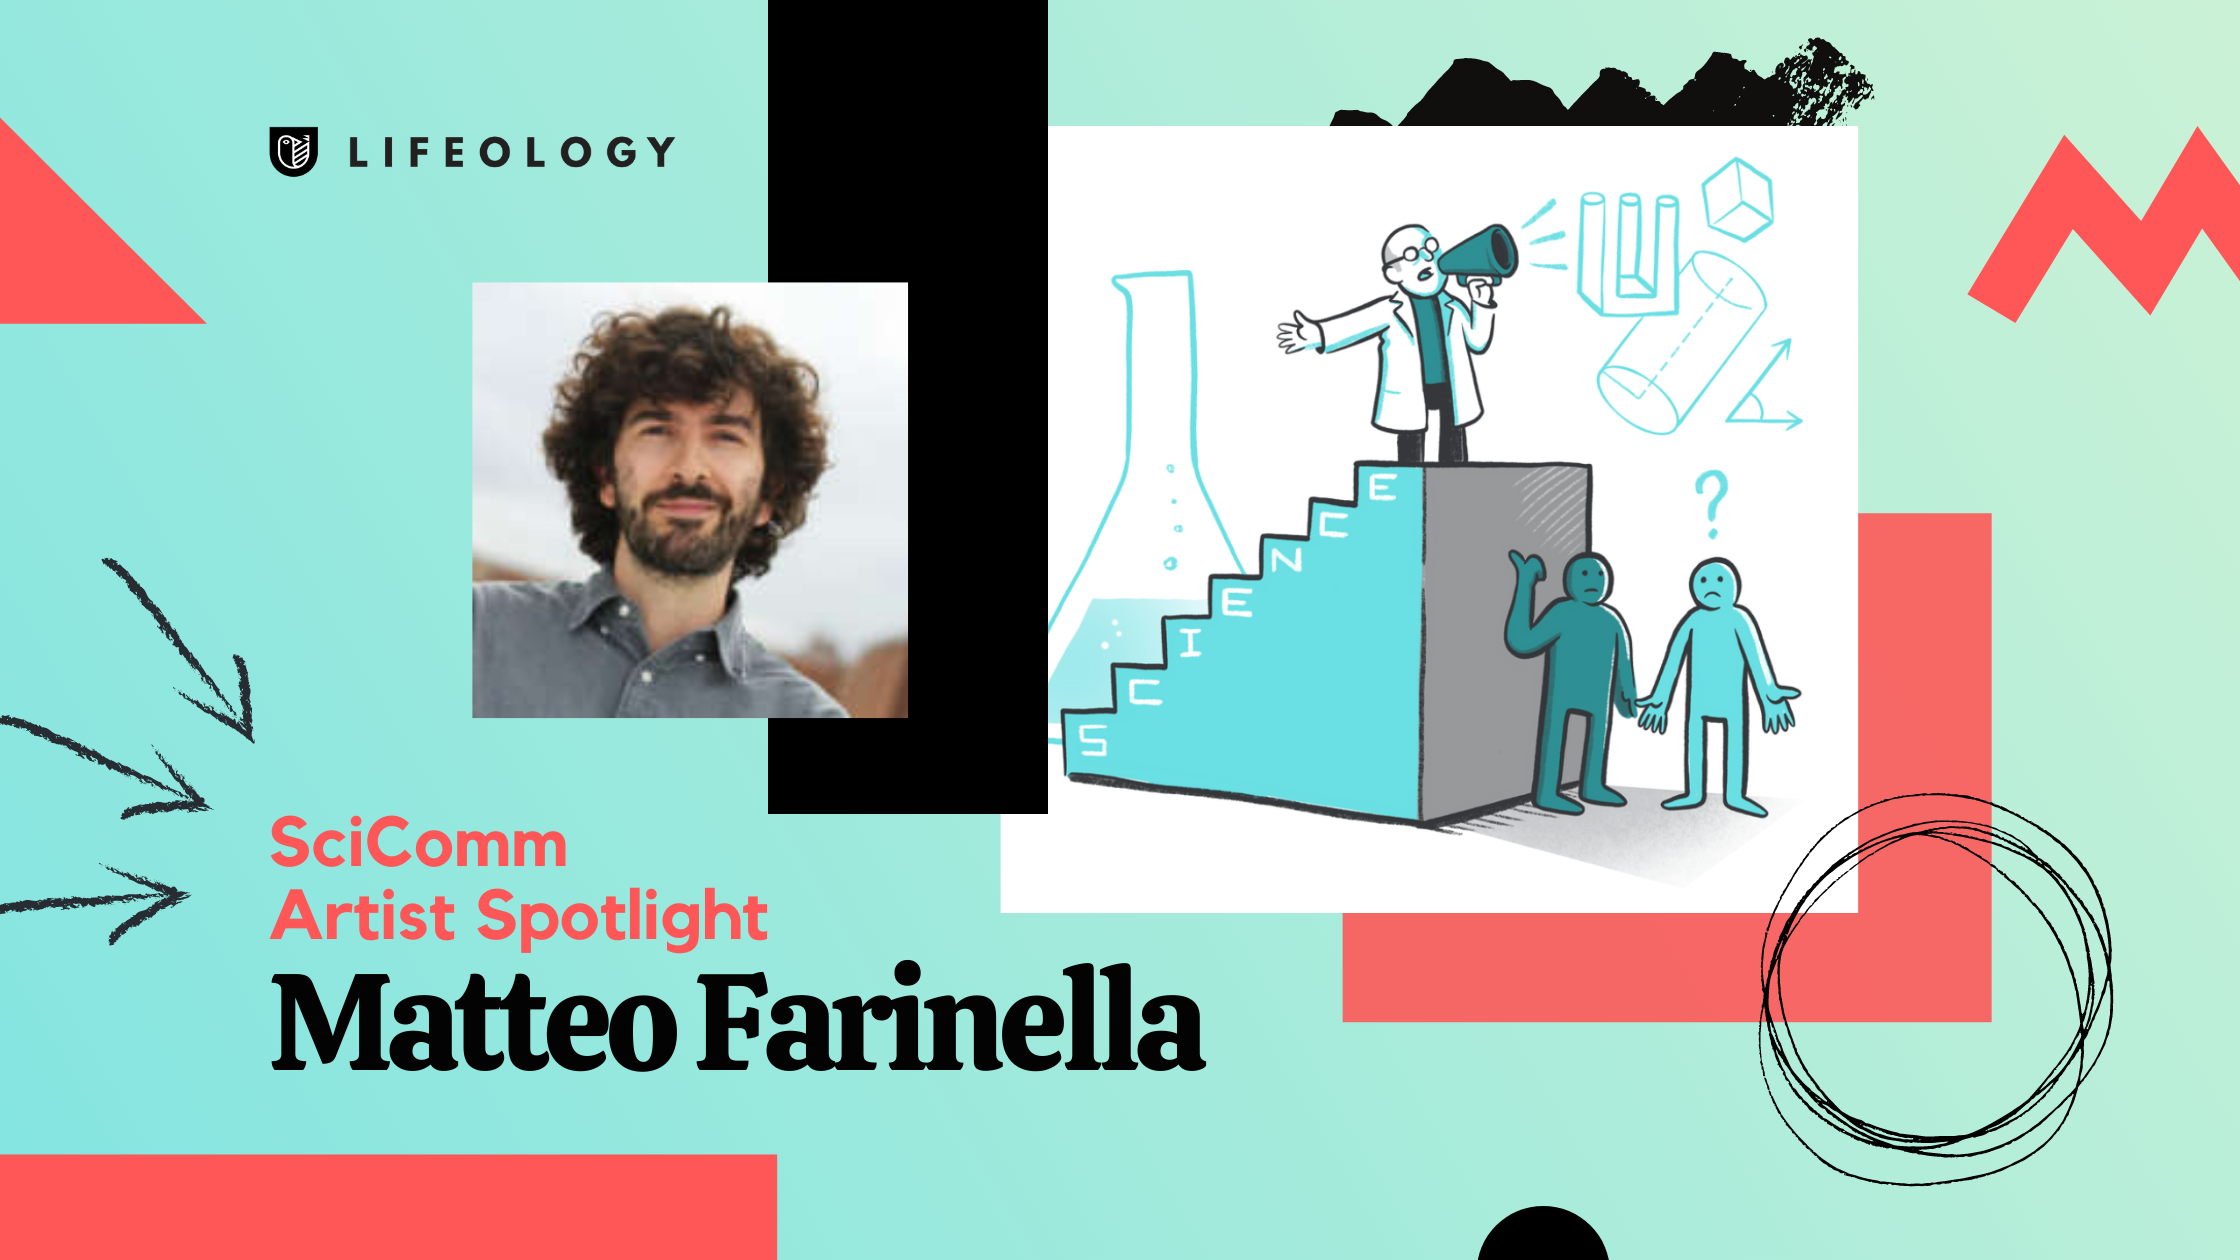 A banner showing an image of Matteo Farinella and an illustration from the scicomm course he illustrated.